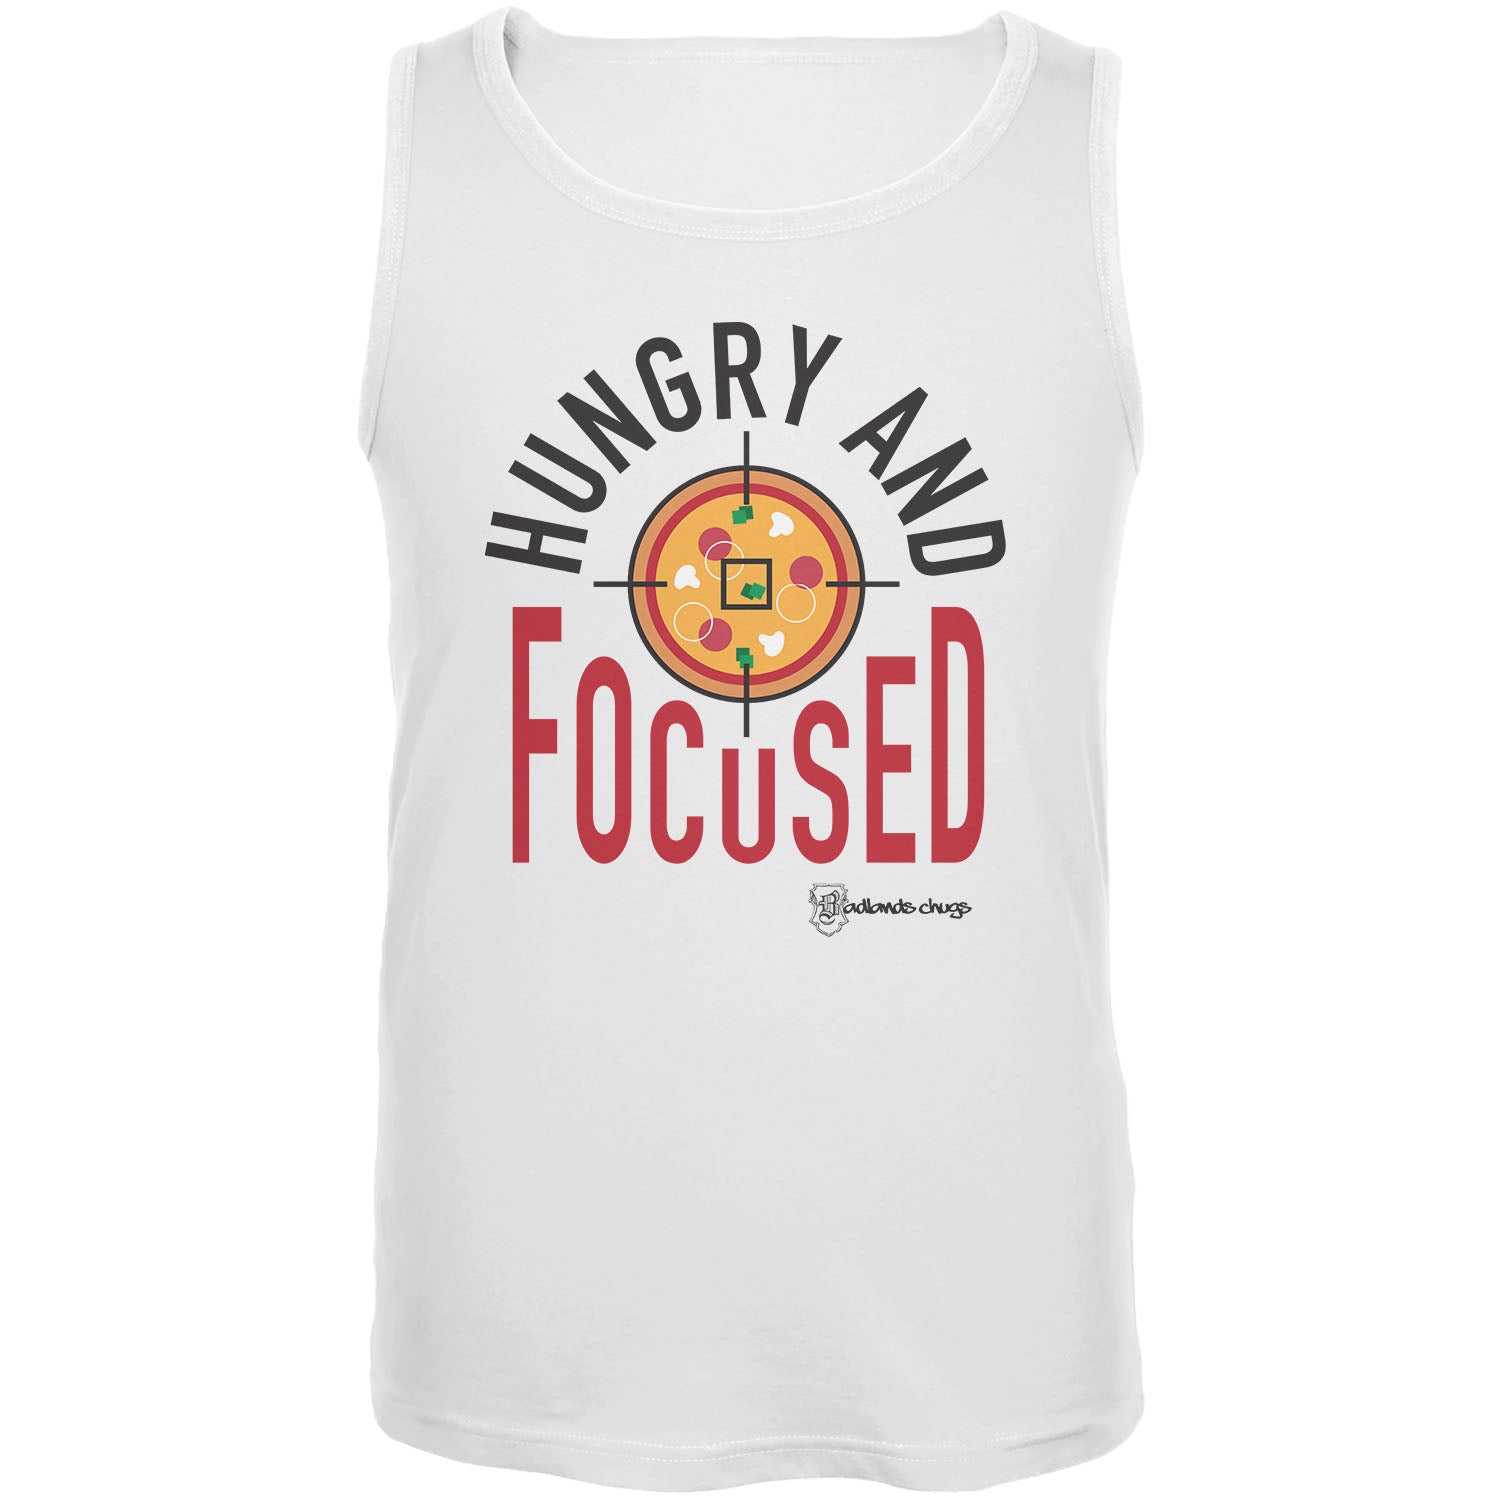  Hungry and Focused Men's Tank Top